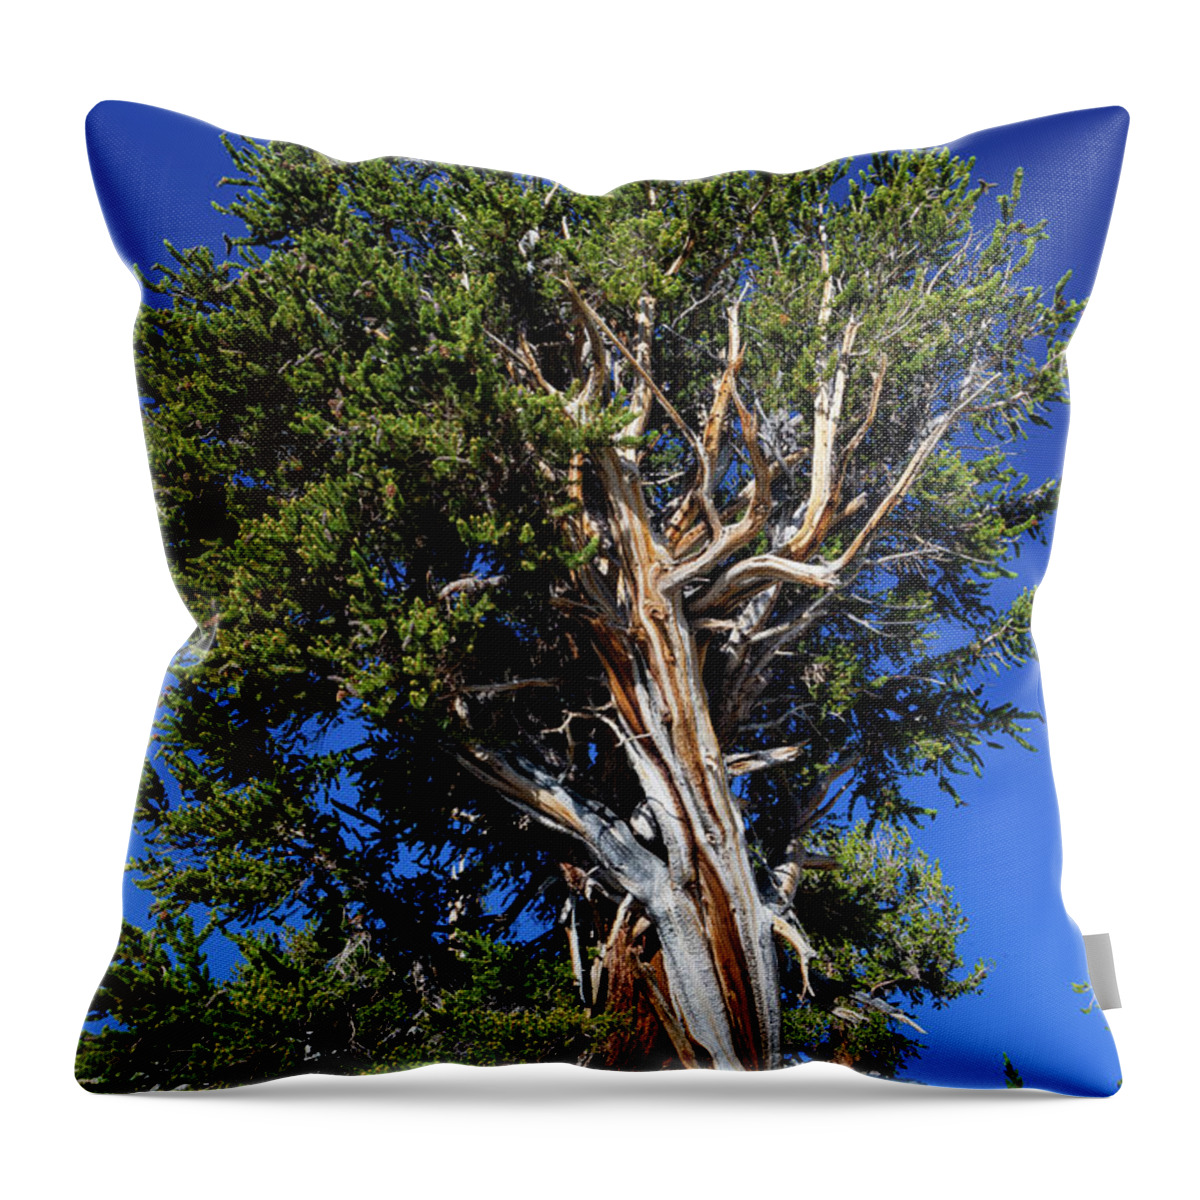 Photography Throw Pillow featuring the photograph Low Angle View Of Pine Tree In Ancient by Panoramic Images